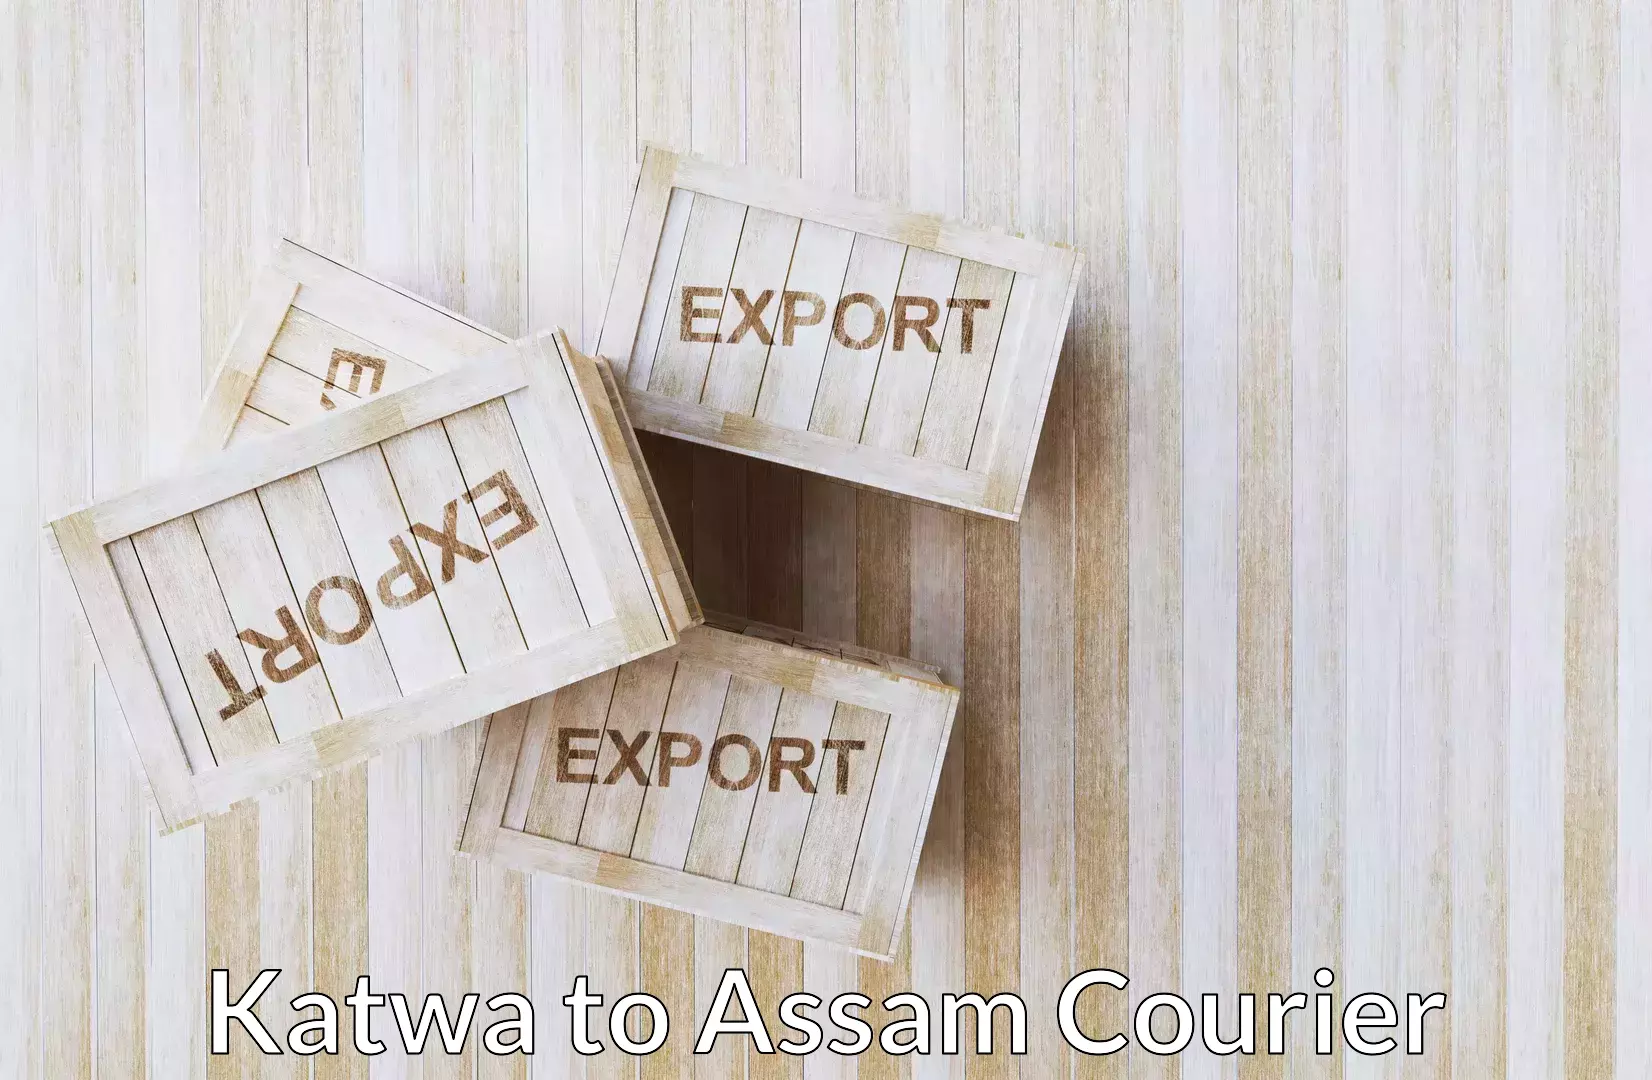 Baggage transport quote Katwa to Lala Assam